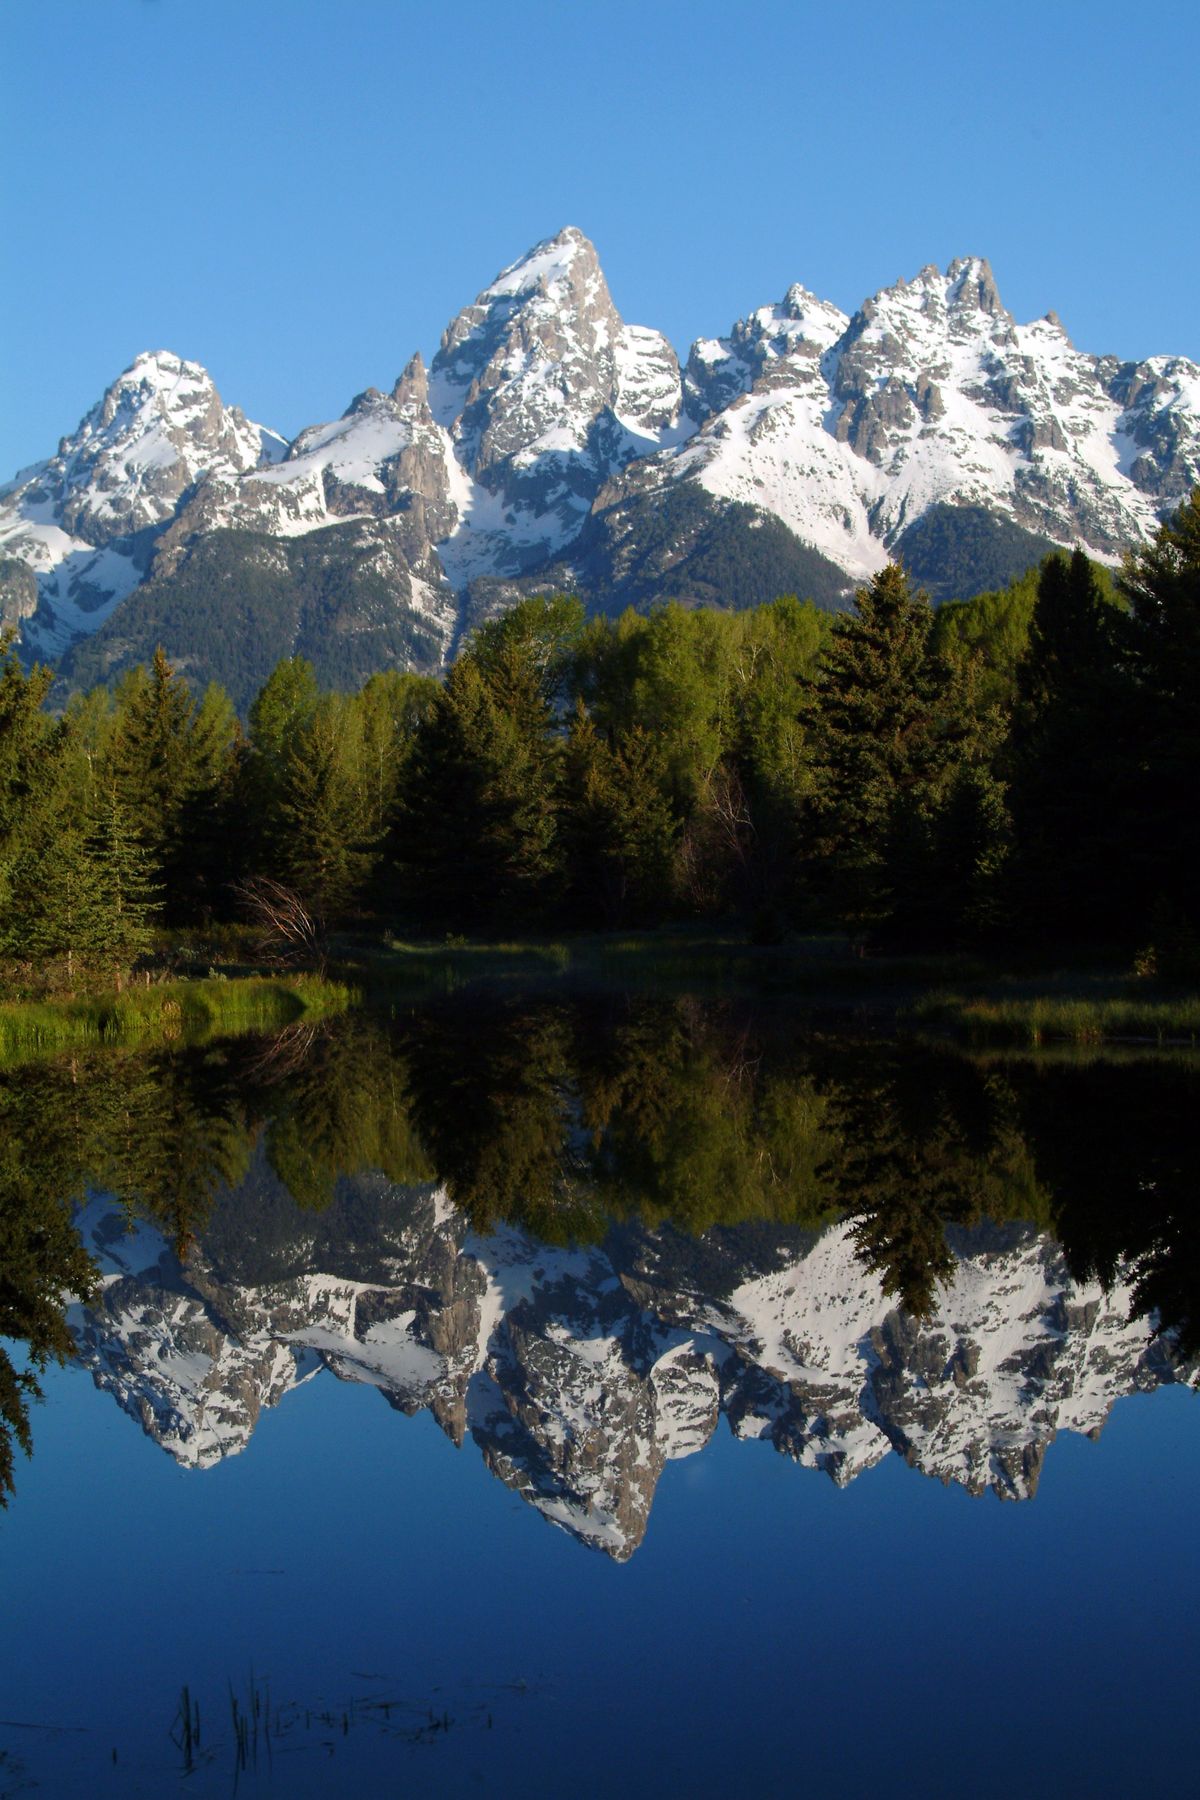 A landscape showing Grand Teton National Park in Wyoming, also part of Ken Burns’ series. Courtesy of Florentine Films and WETA (Courtesy of Florentine Films and WETA / The Spokesman-Review)